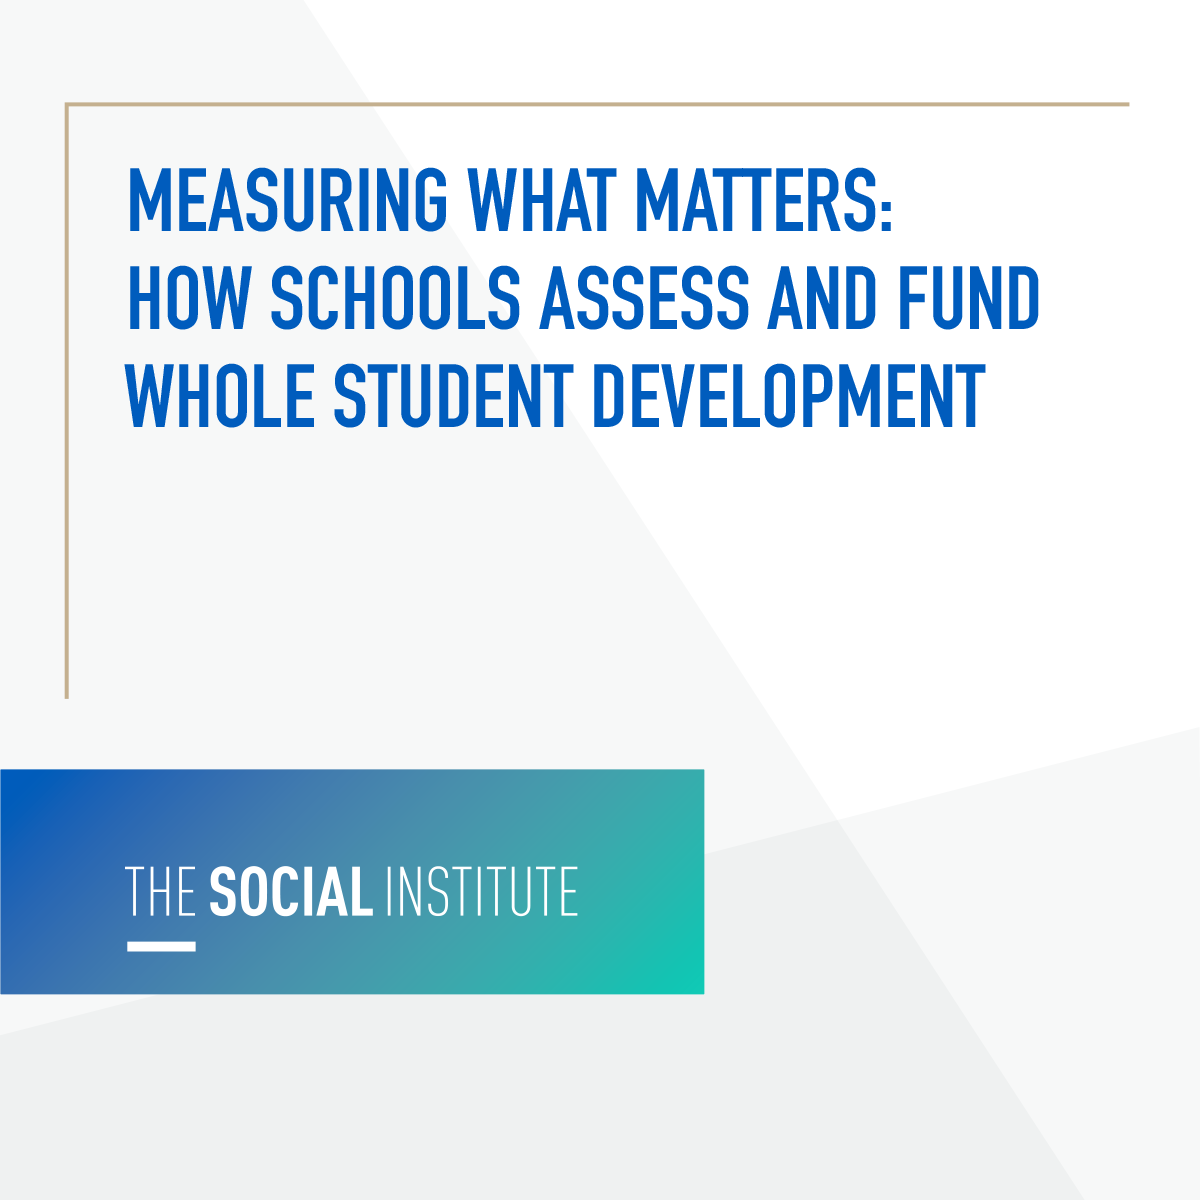 Measuring what matters: how schools assess and fund whole student development